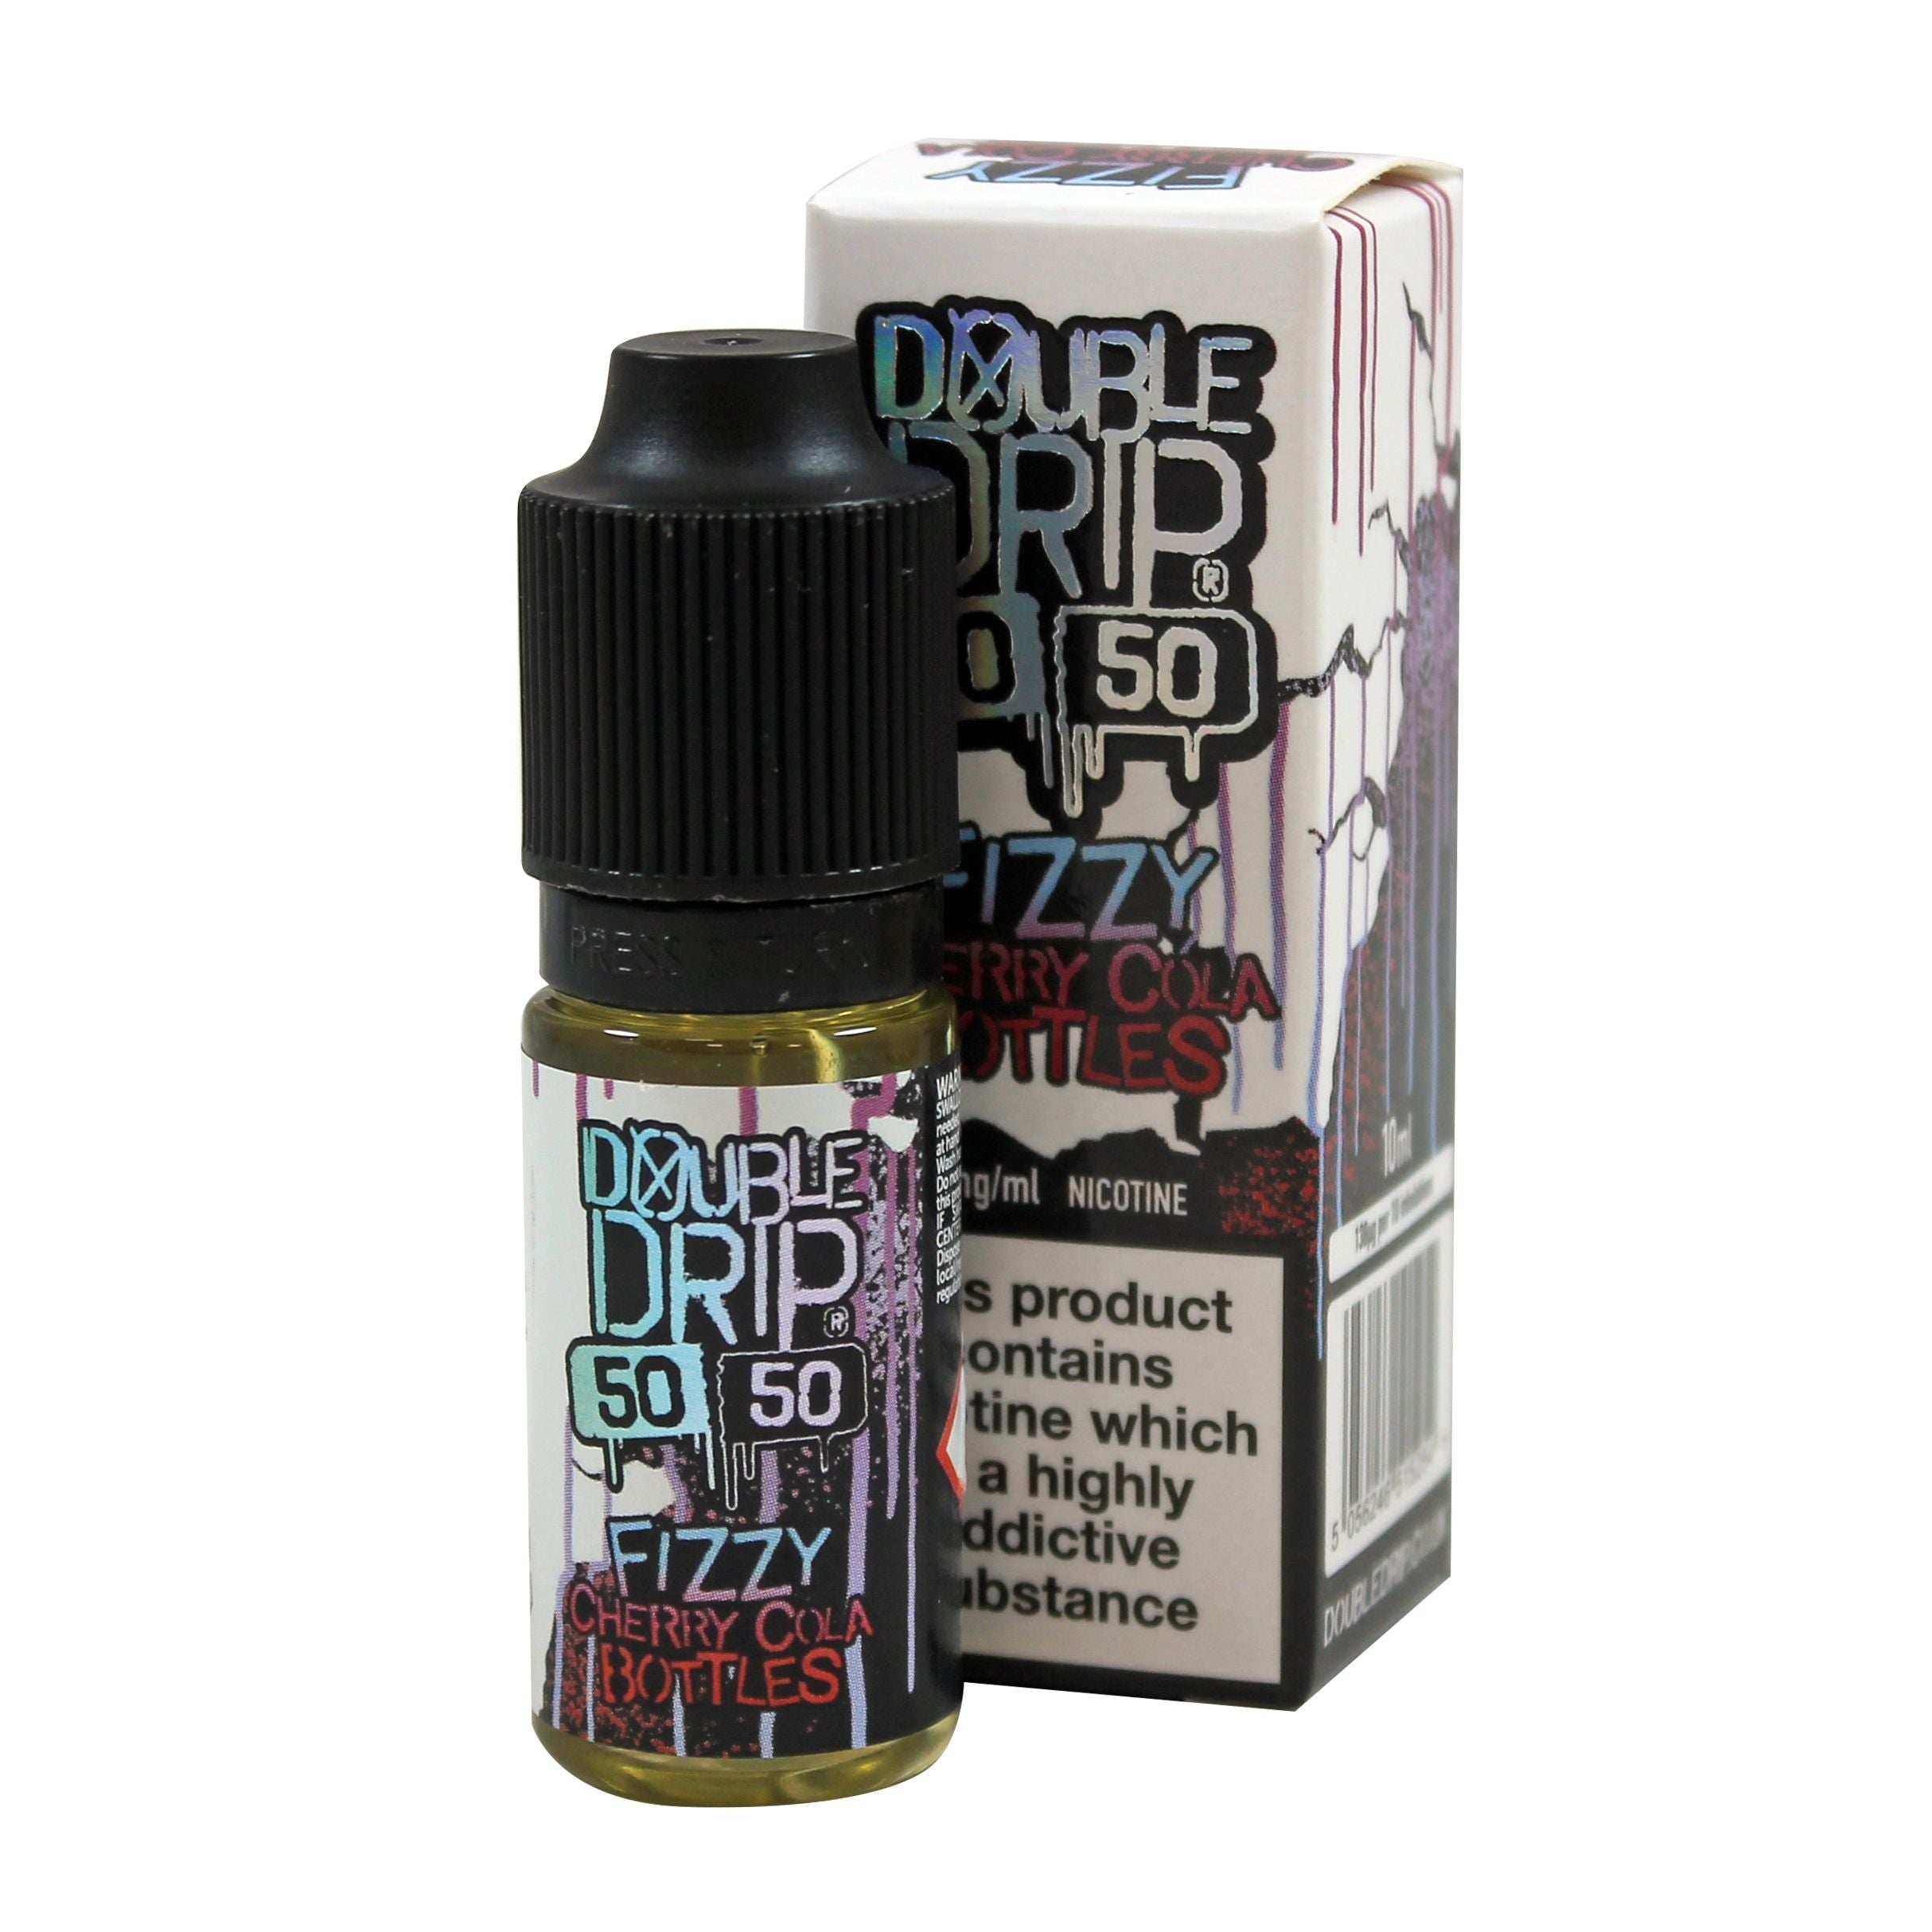 Double Drip 50:50 Fizzy Cherry Cola Bottles 10ml-12mg